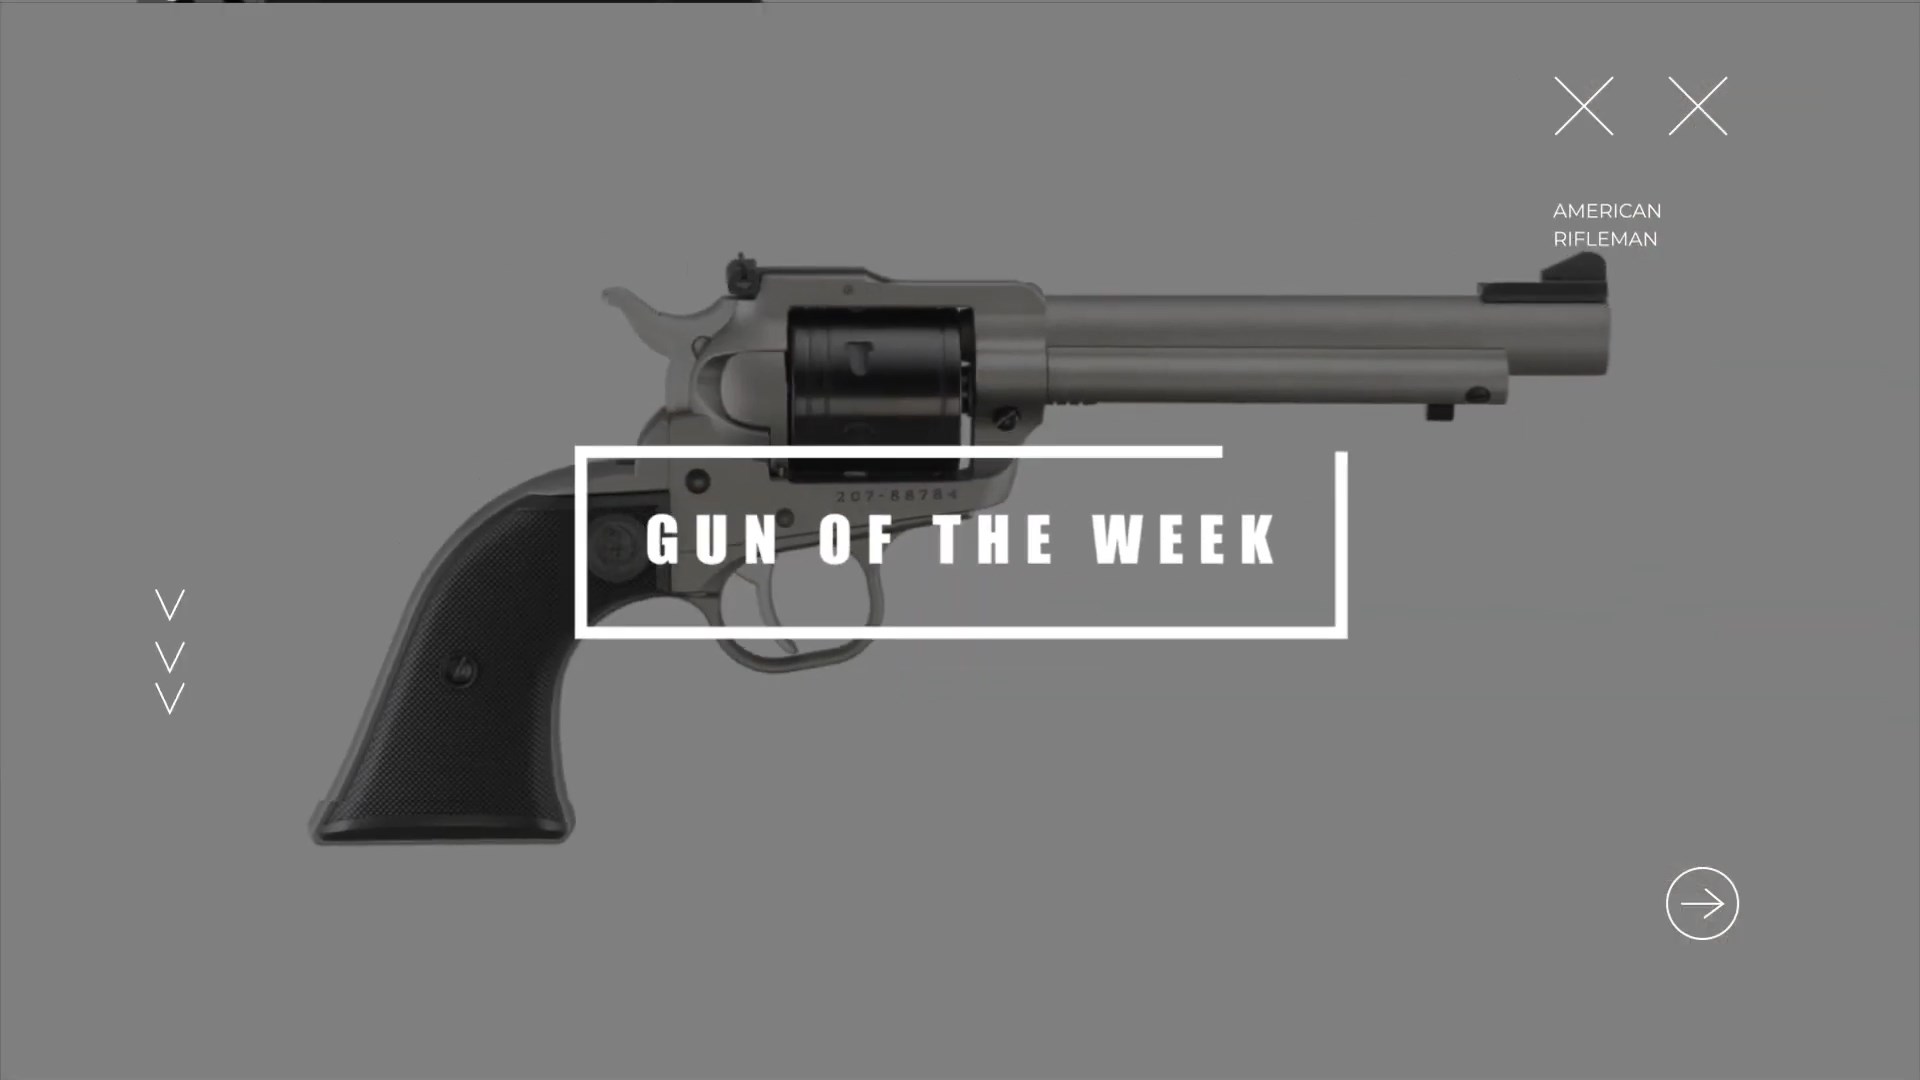 GUN OF THE WEEK AMERICAN RIFLEMAN text on image overlay revolver